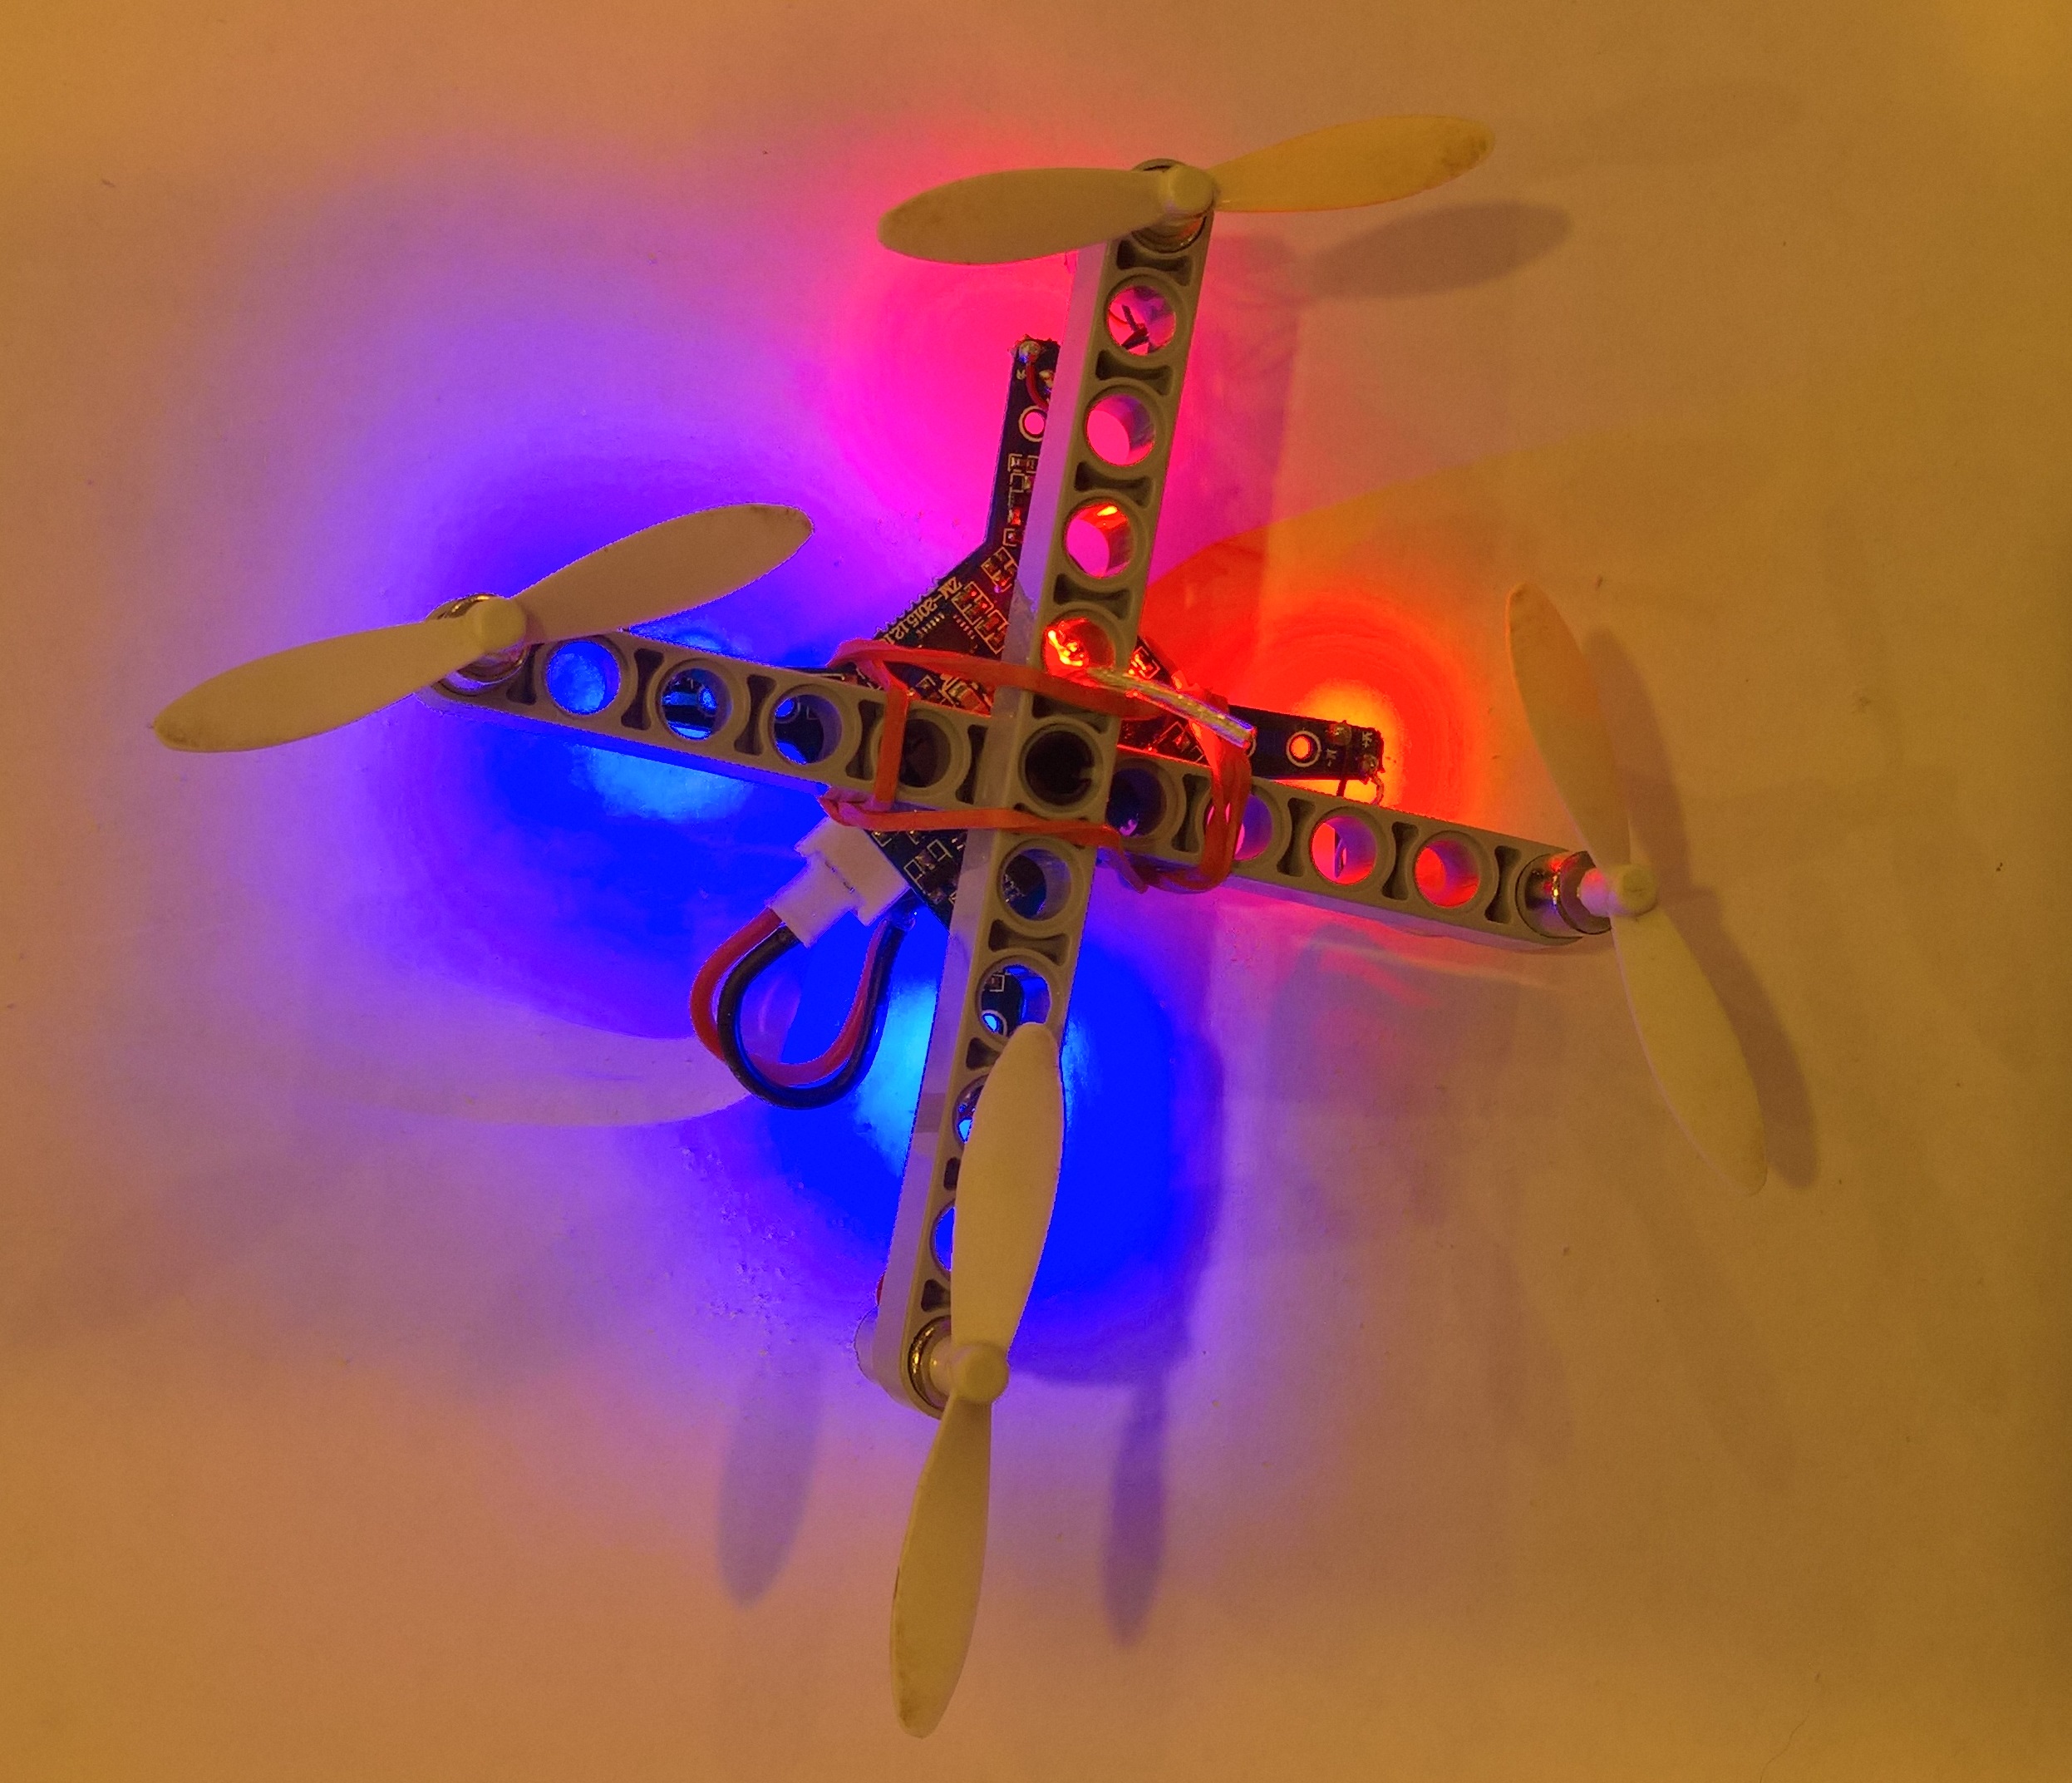 Flying high: Building of a Lego Drone